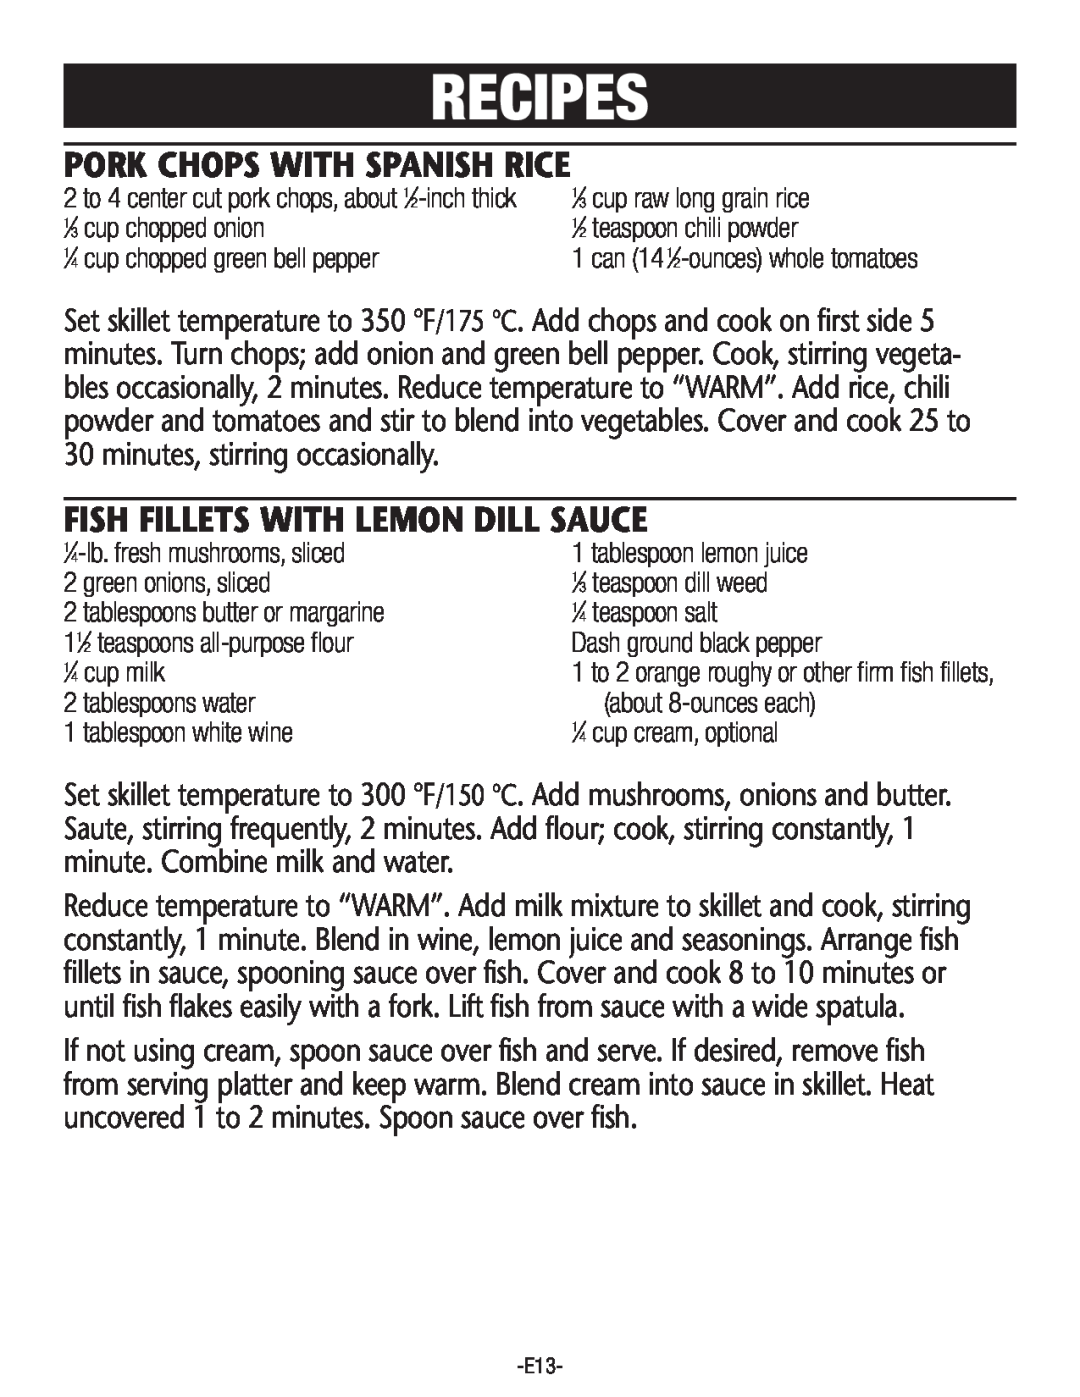 Rival S160 manual Recipes, Pork Chops With Spanish Rice, Fish Fillets With Lemon Dill Sauce 